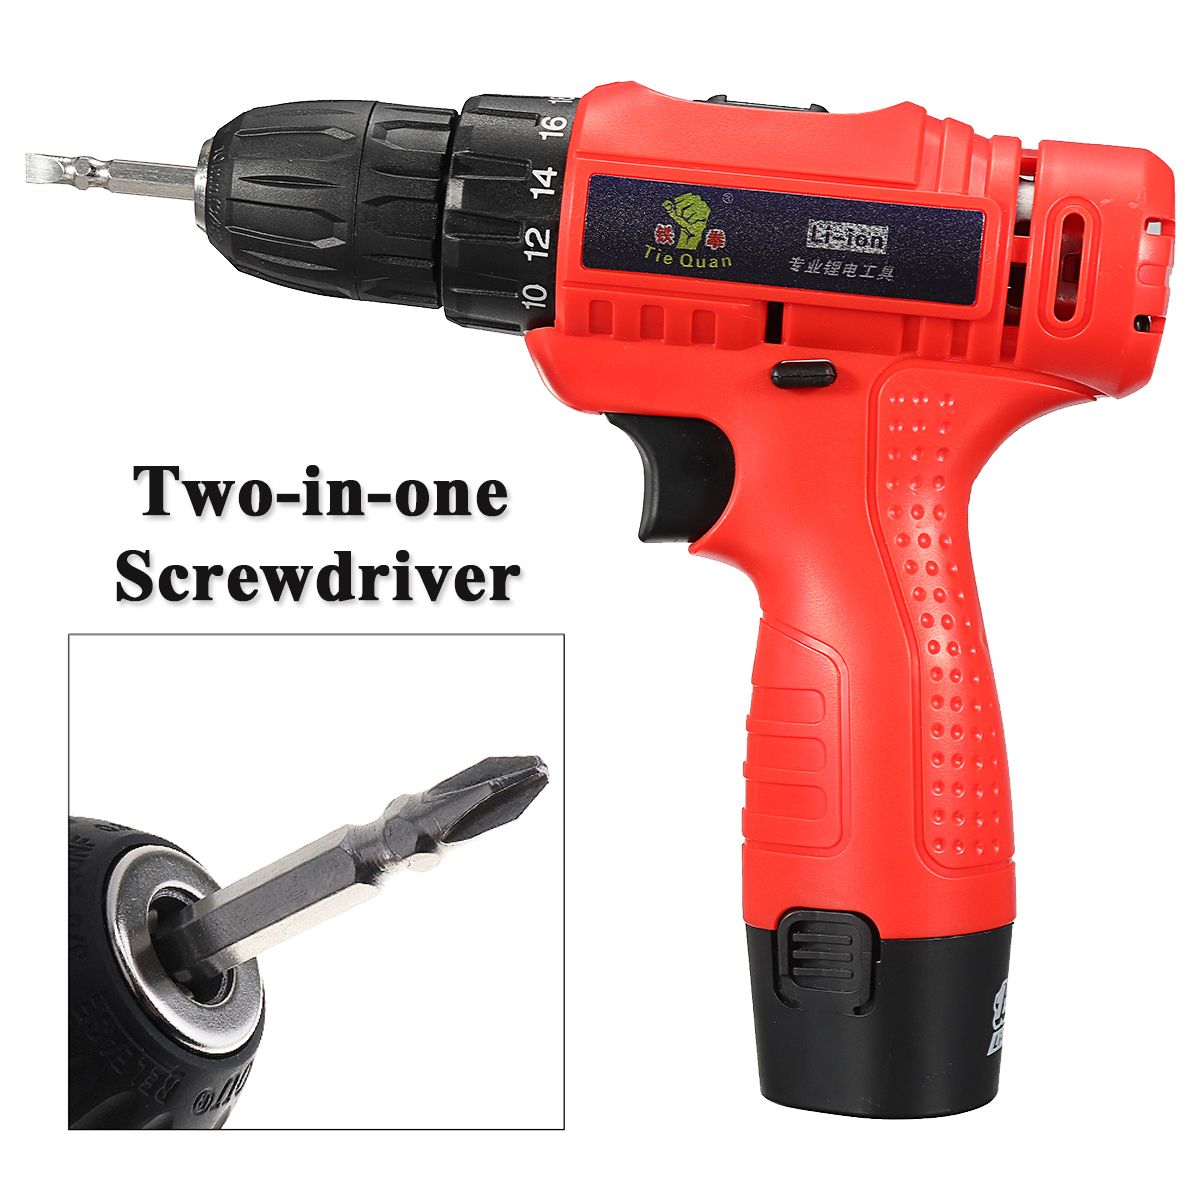 110V-240V-Cordless-Electric-Screwdriver-1-Battery-1-Charger-Drilling-Punching-Power-Tools-1287724